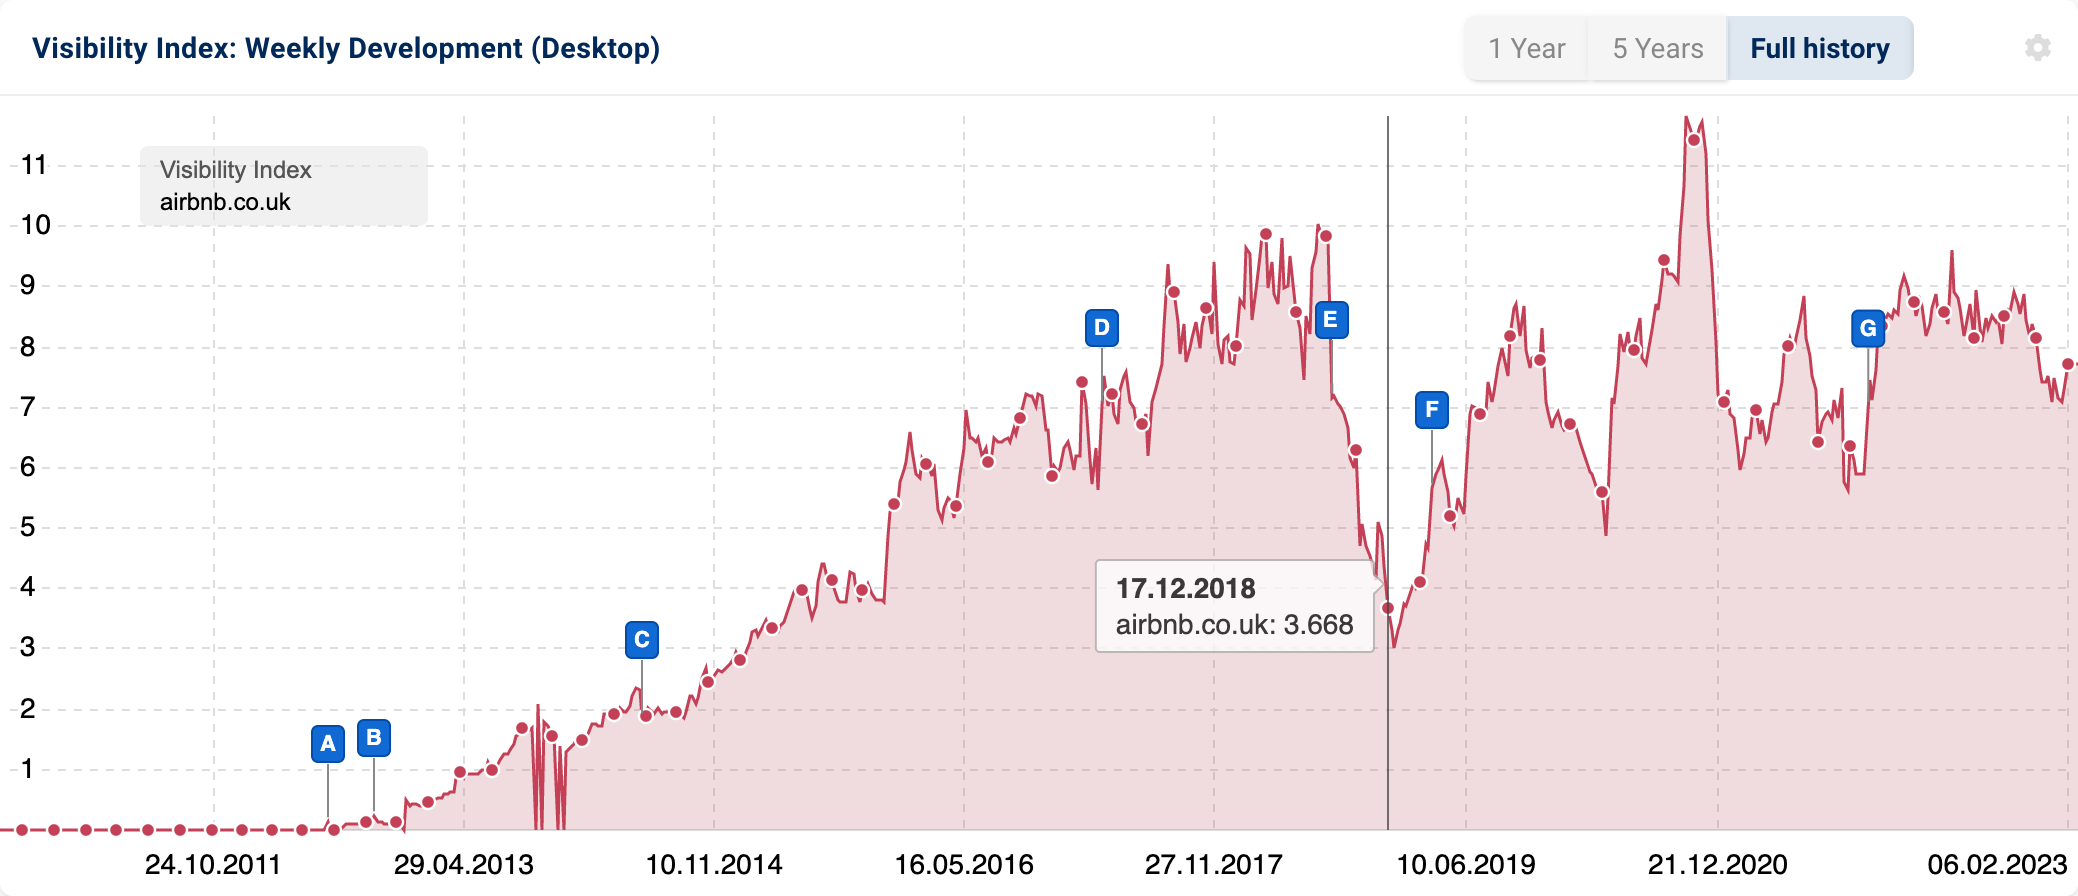 The domain airbnb.co.uk has tended to trend up and down since 2011, with a slight upward trend. It has been affected by numerous Google updates.